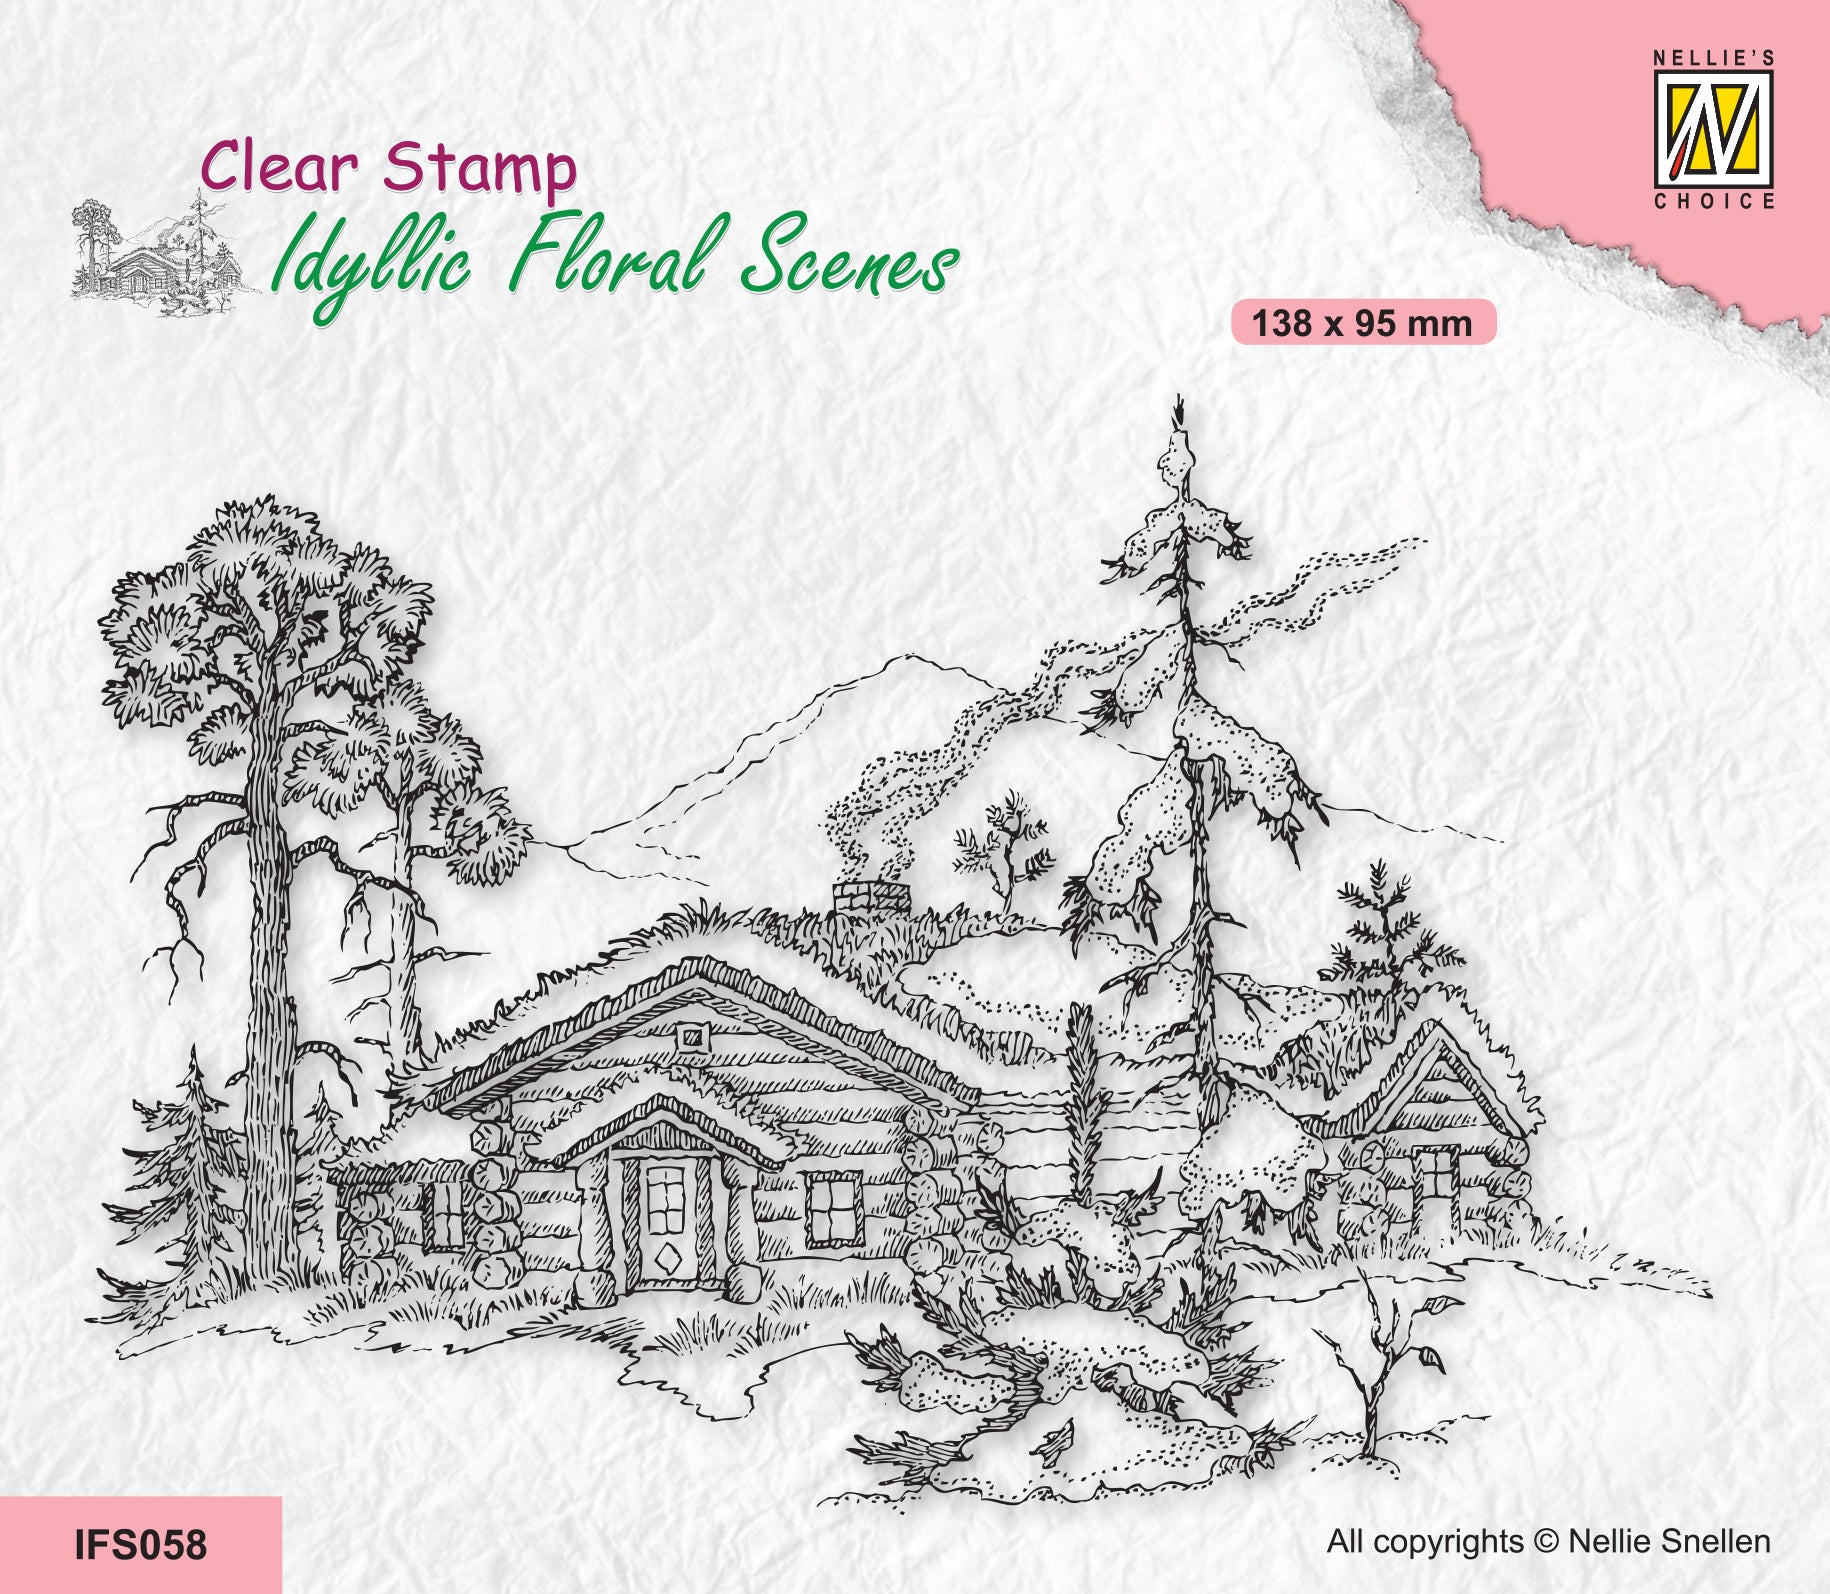 Nellie's Choice Clear Stamp Idyllic Floral Scene - Wintery Scene With House And Trees